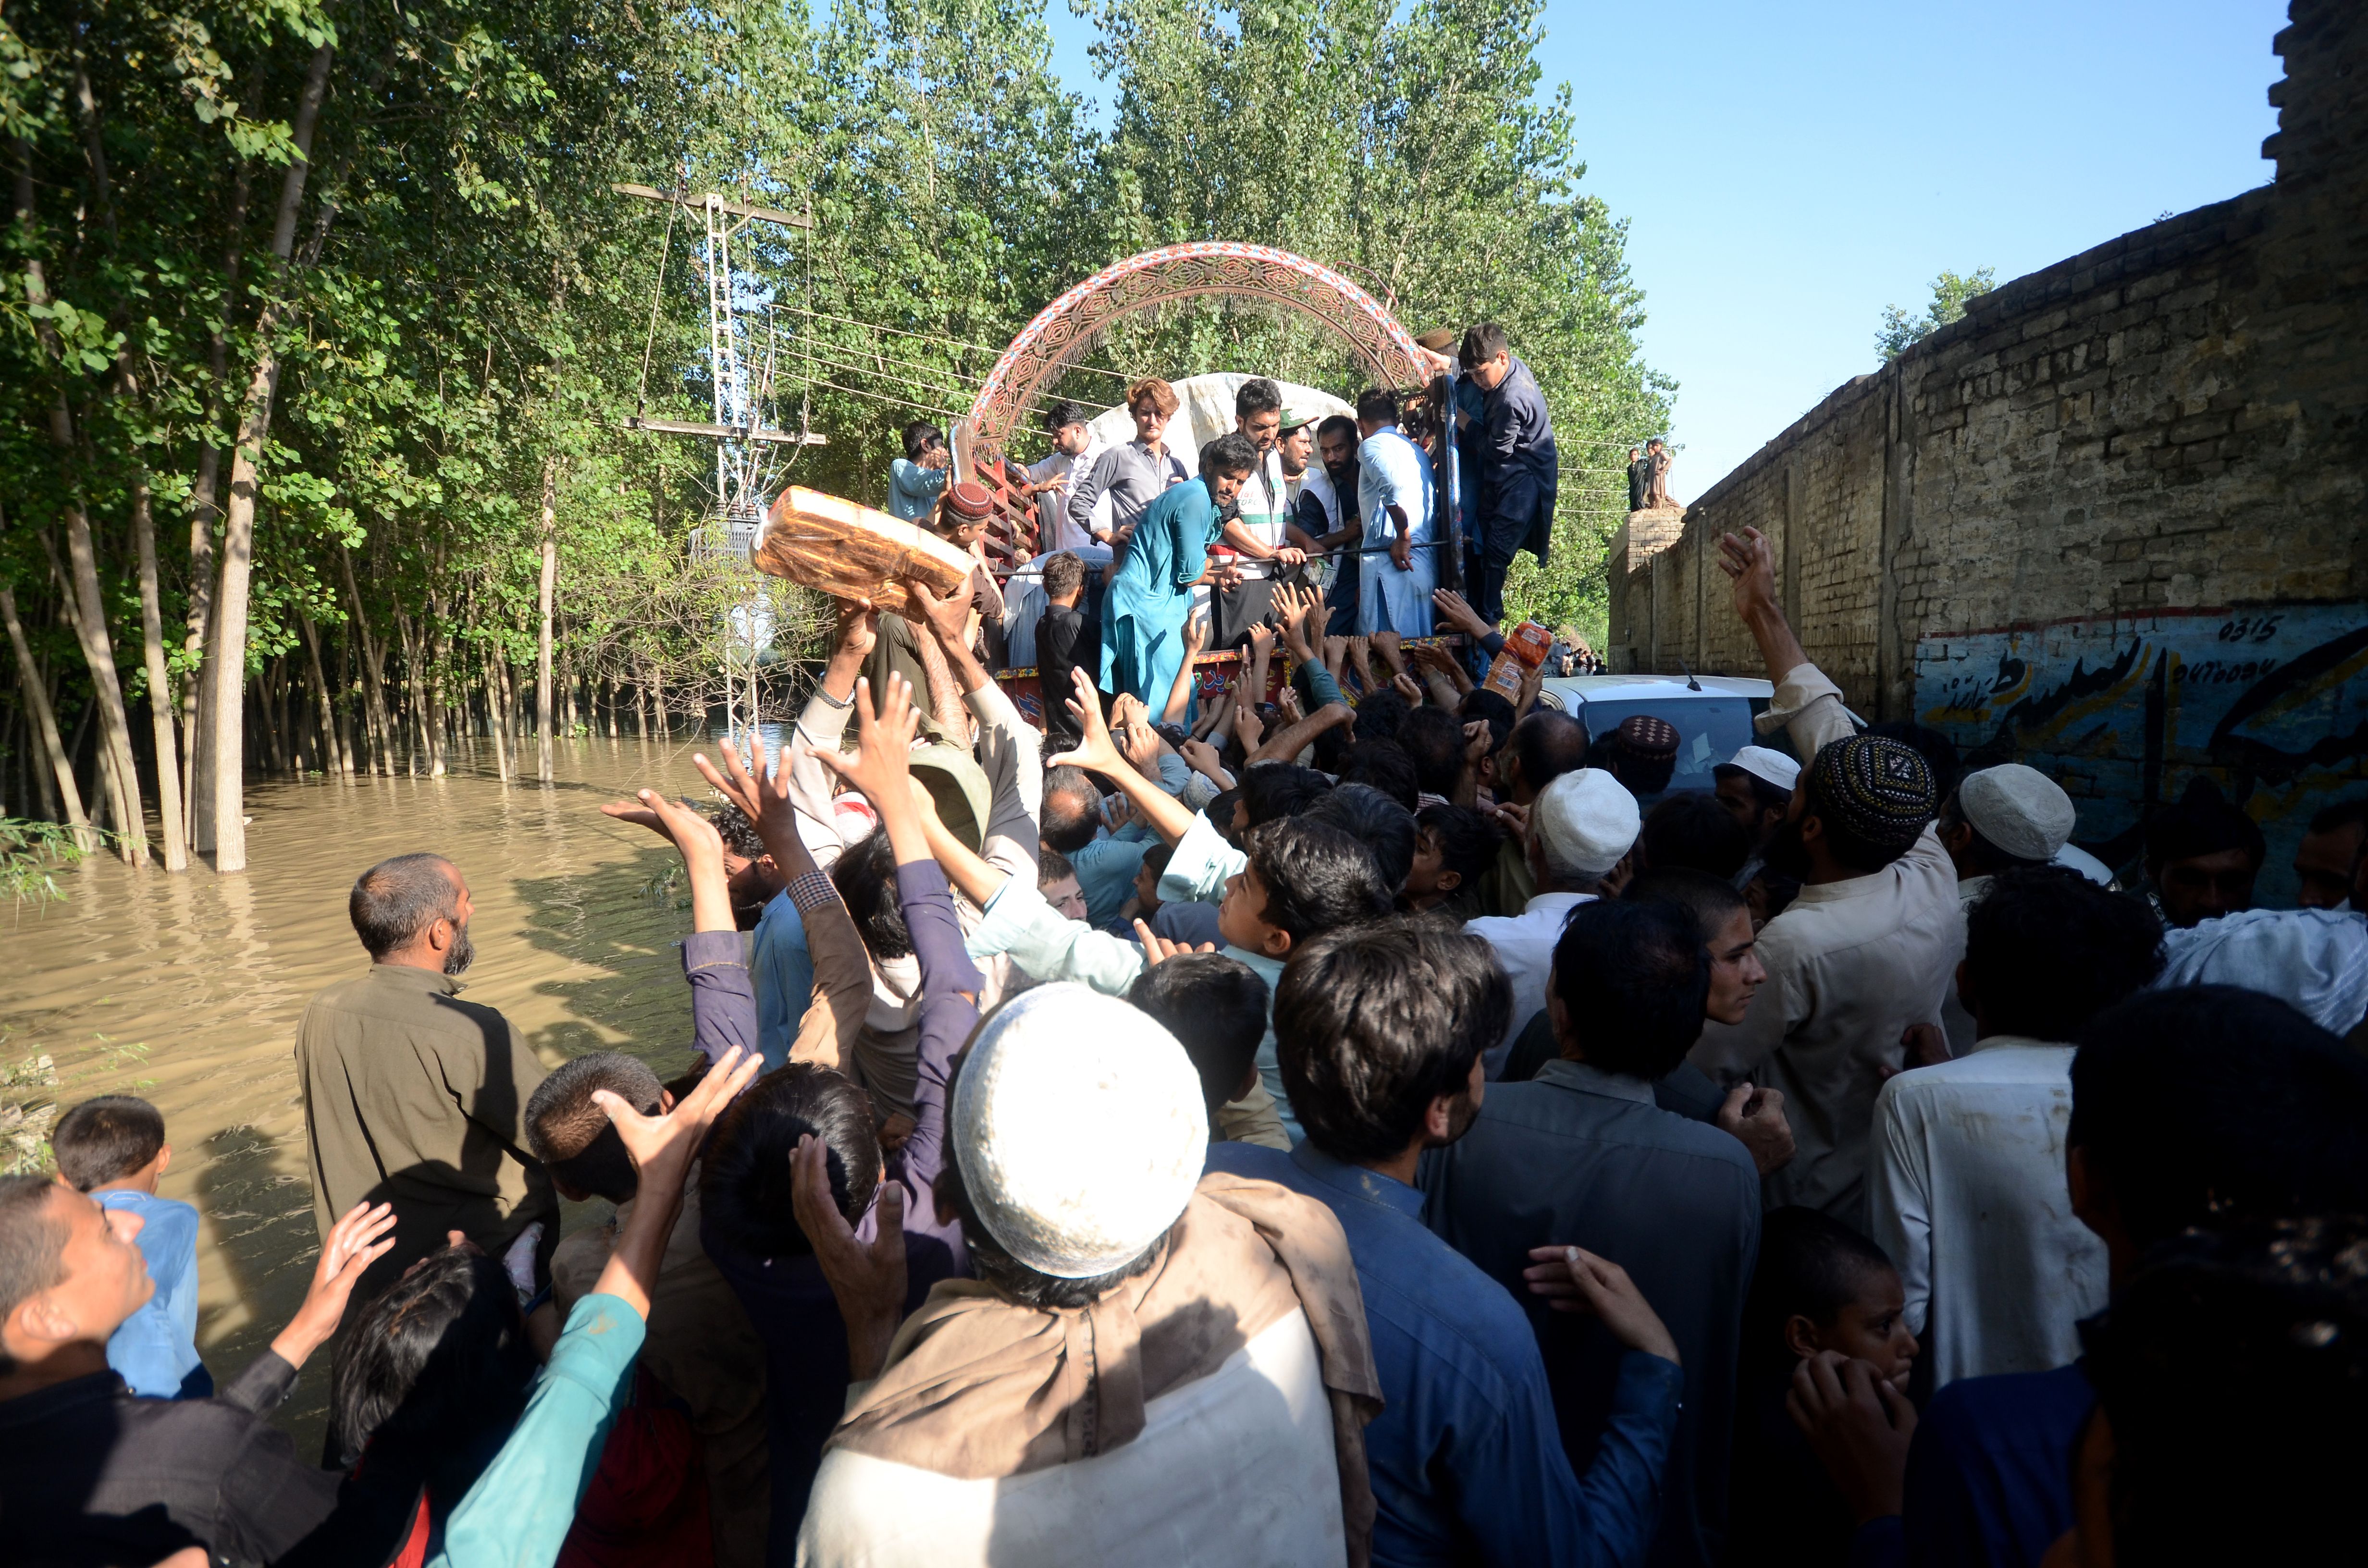 Displaced people receive food aid at a flooded area in Charsadda, Khyber Pakhtunkhwa province, Pakistan on August 28.